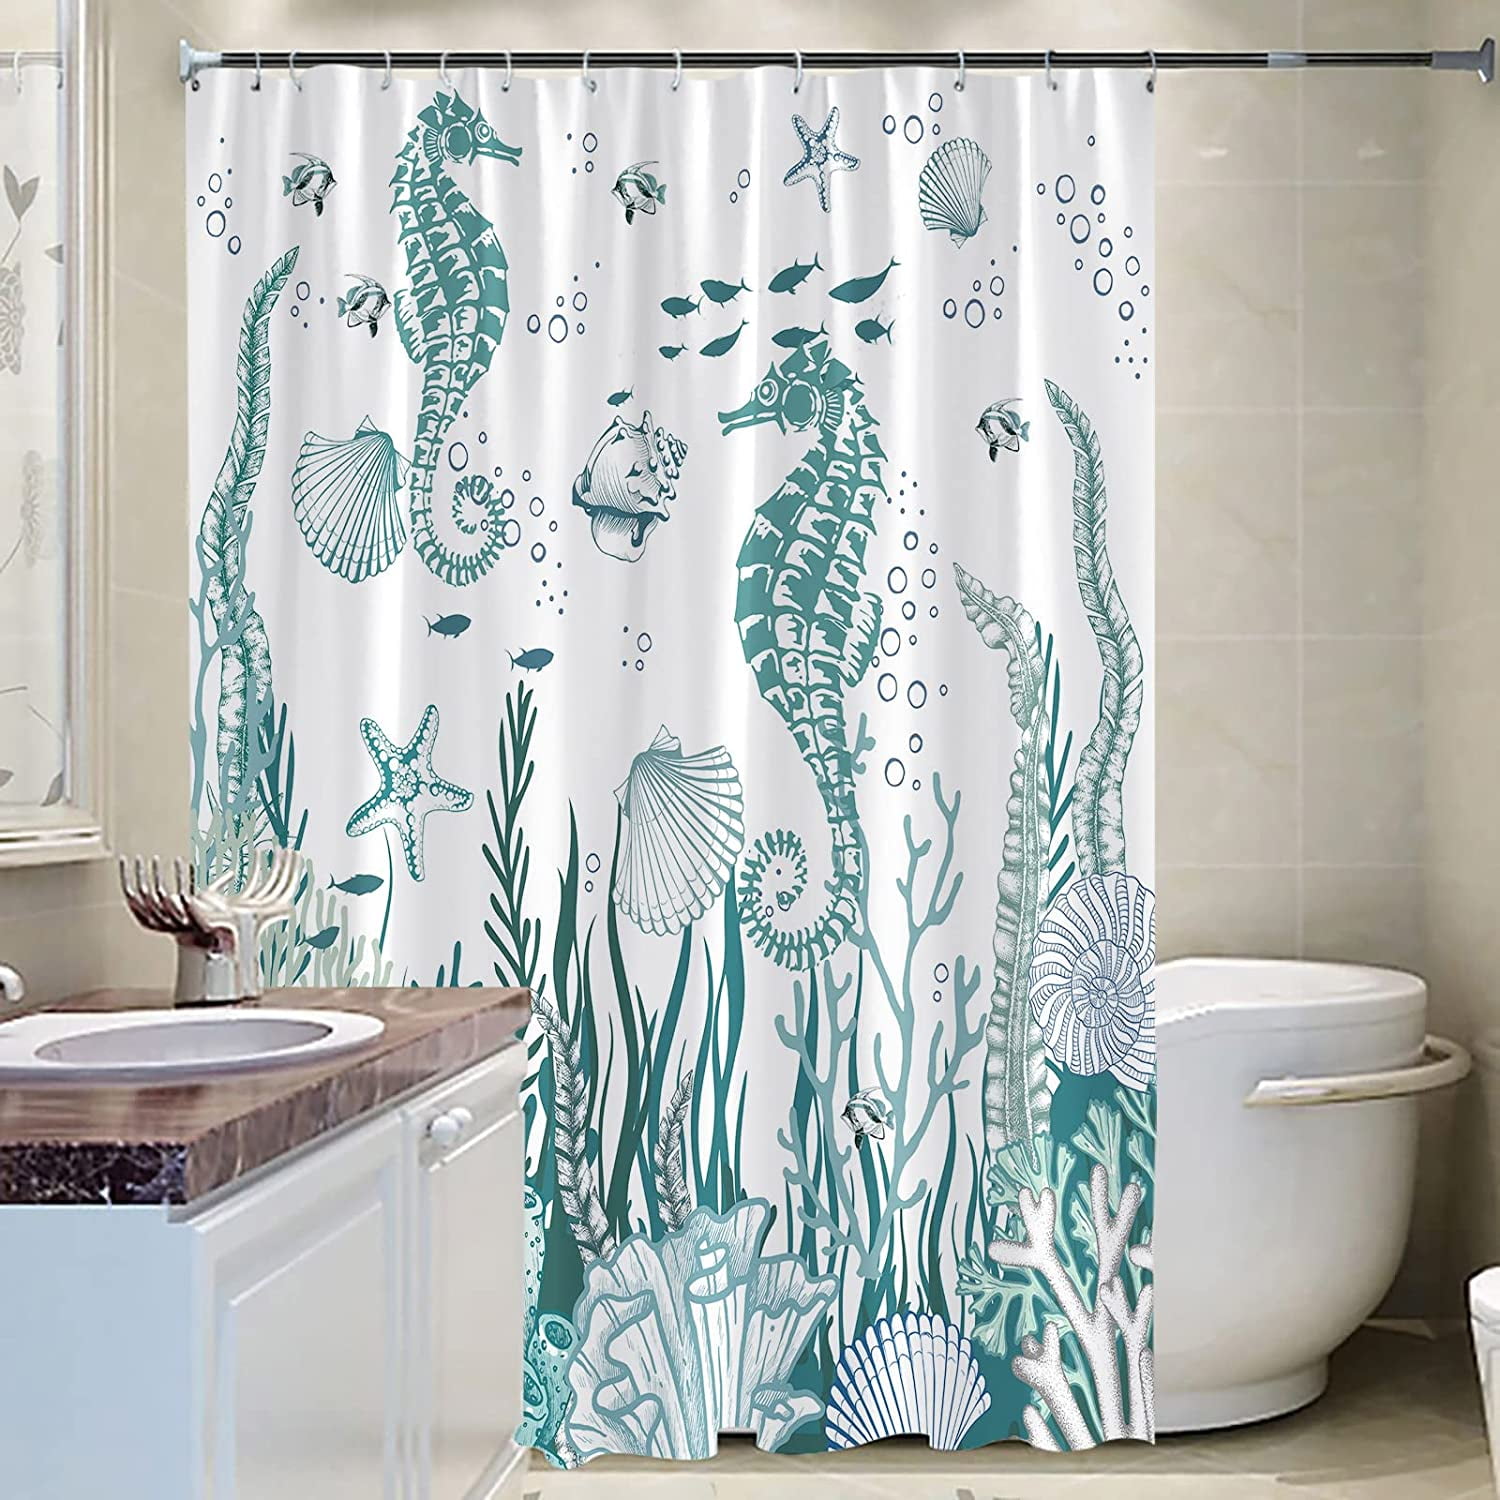 Curtain Of Sea Shells For Decoration Relaxing Ecology Recreation